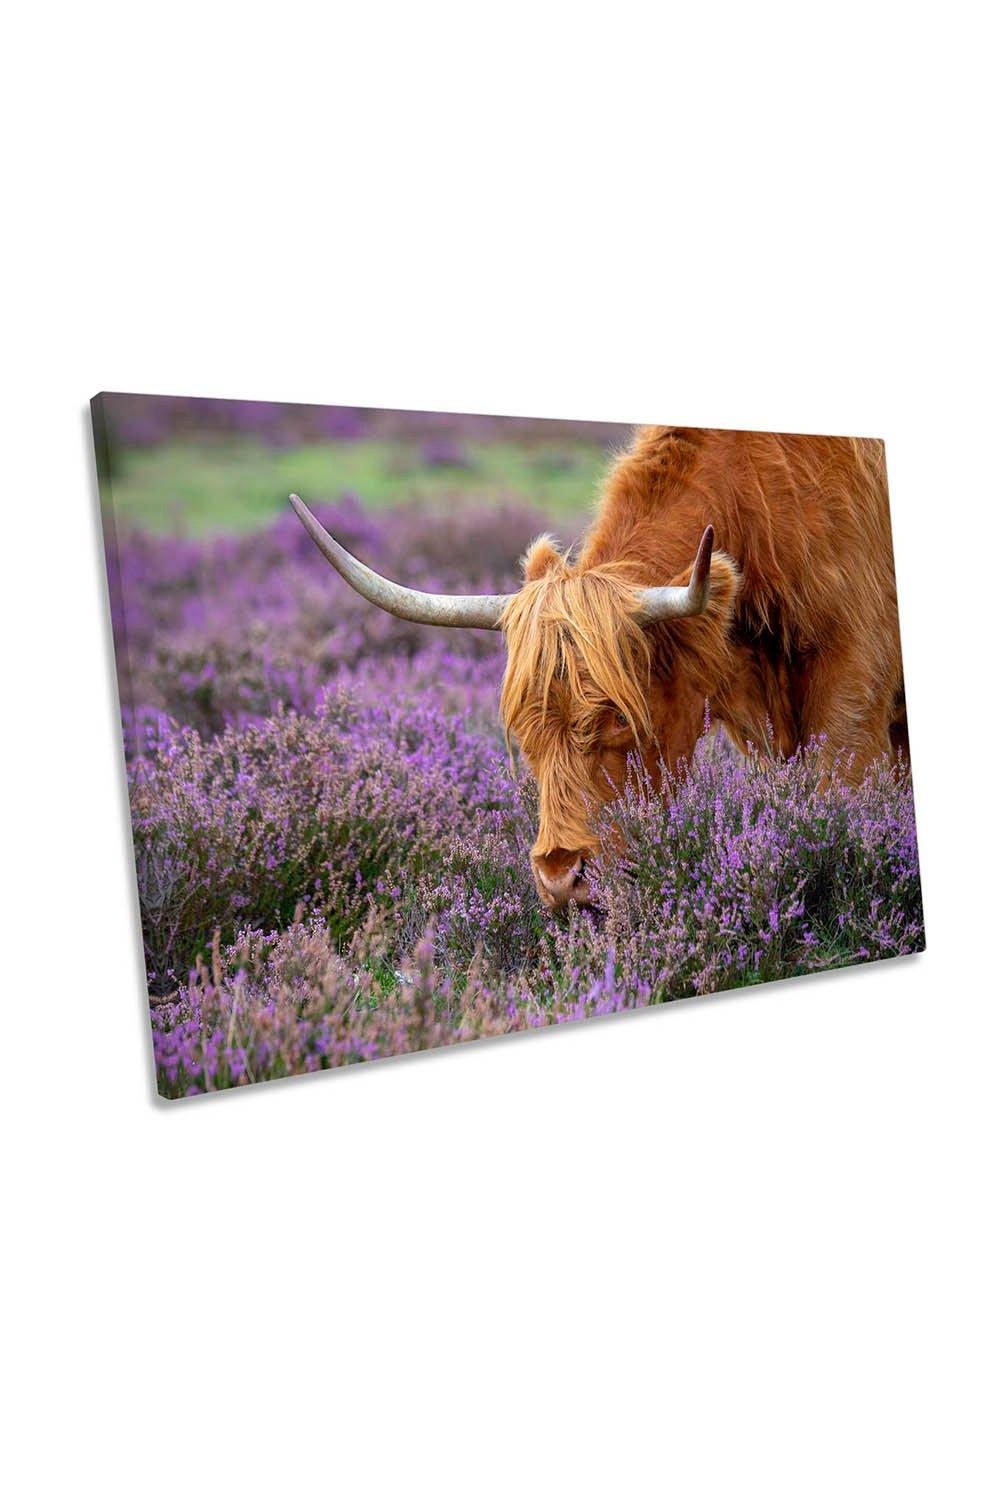 Highland Cow Graze Scottish Canvas Wall Art Picture Print